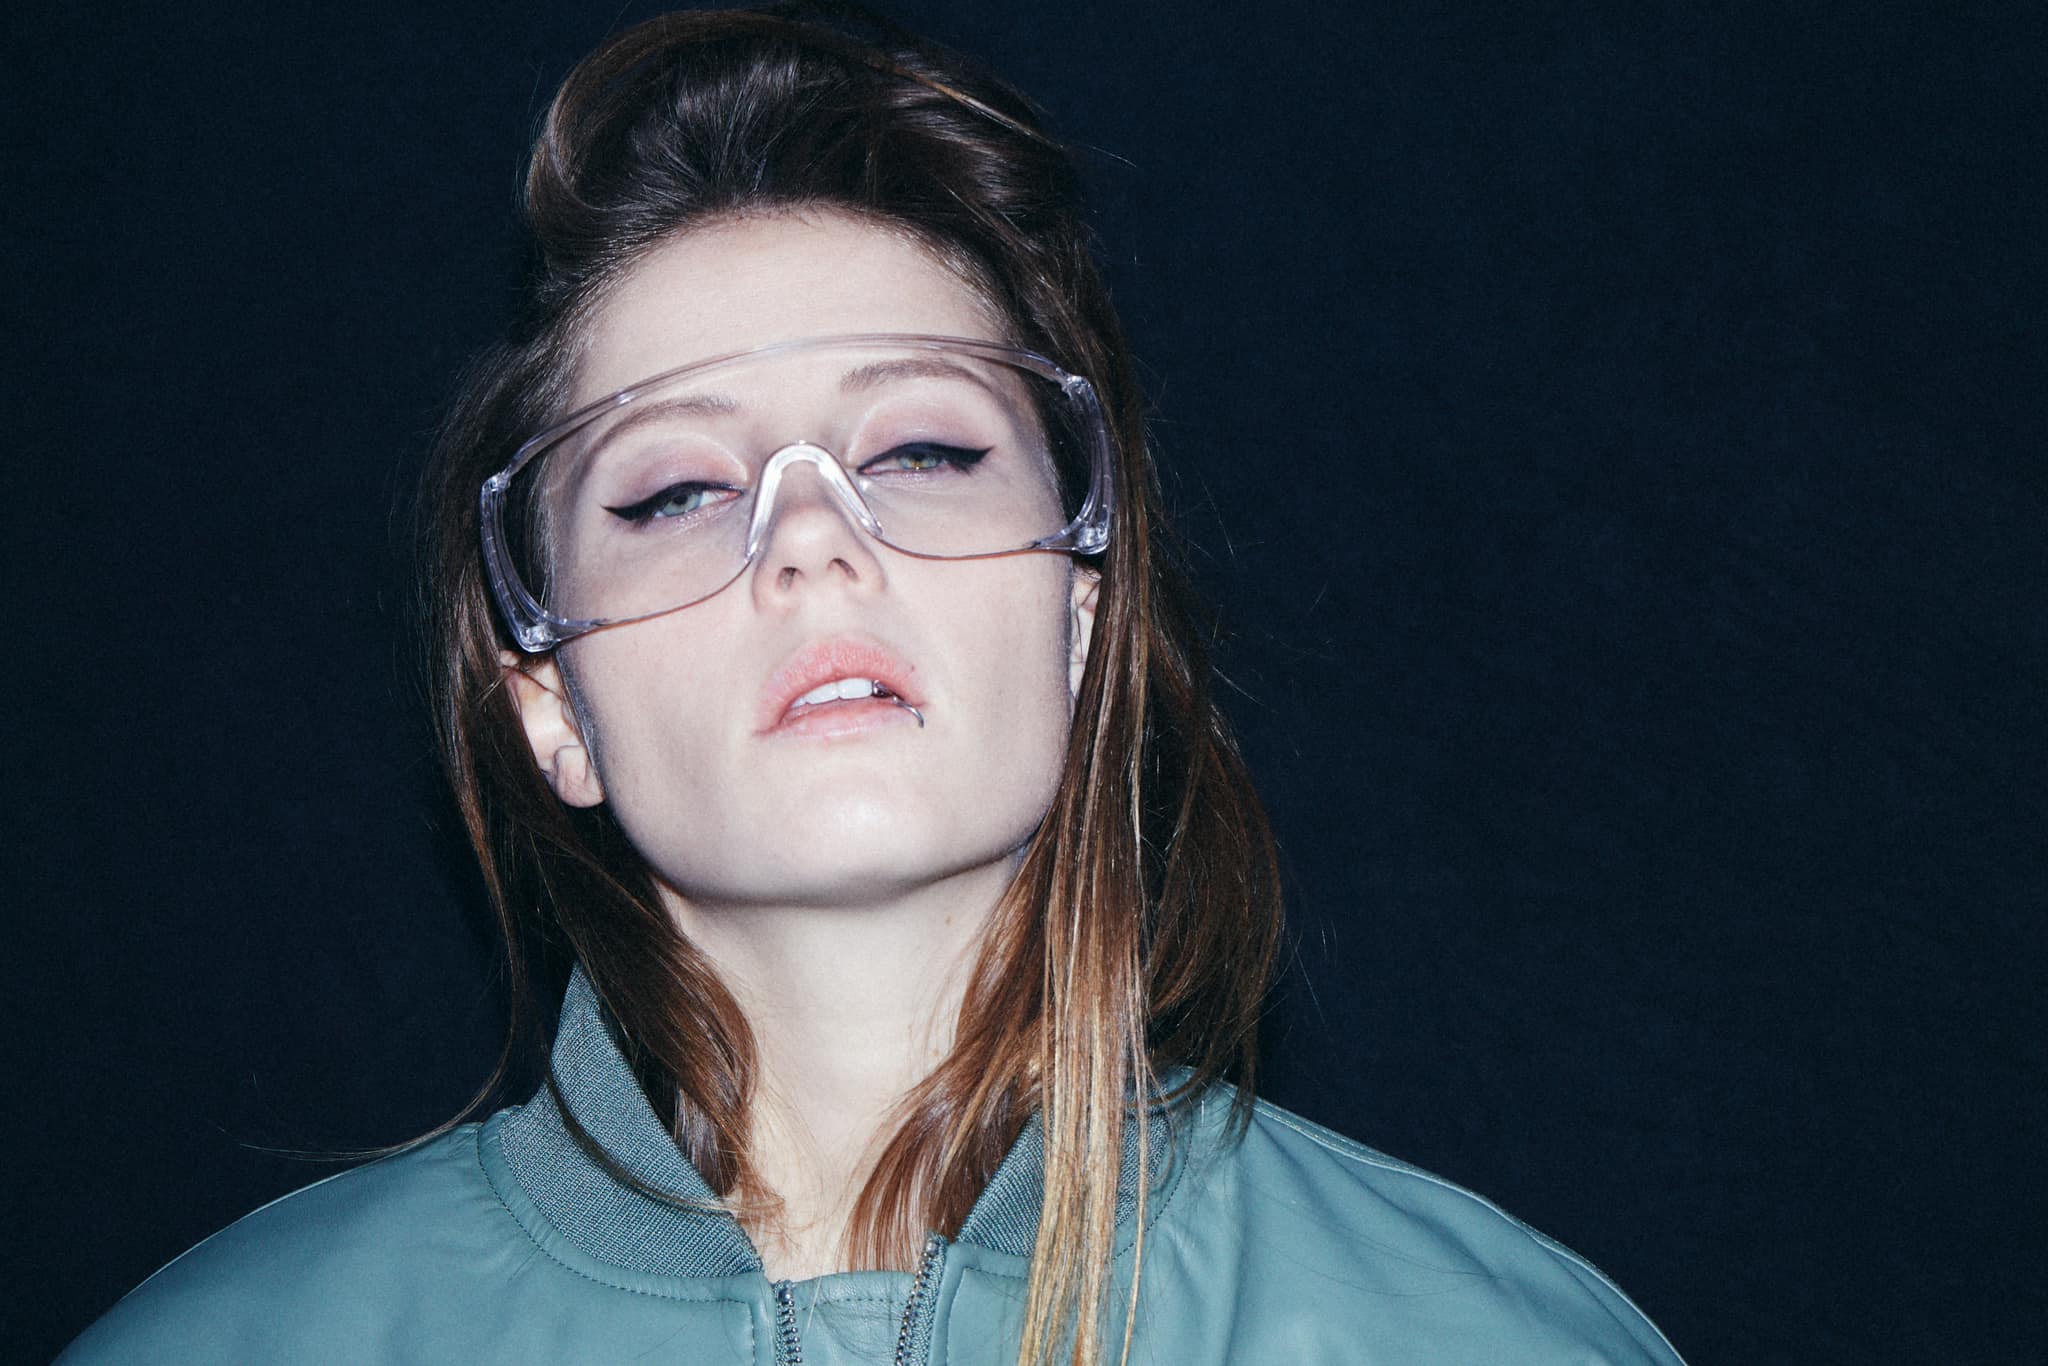 Charlotte de Witte Makes History as First Female to Close out Movement's Main Stage EDMTunes